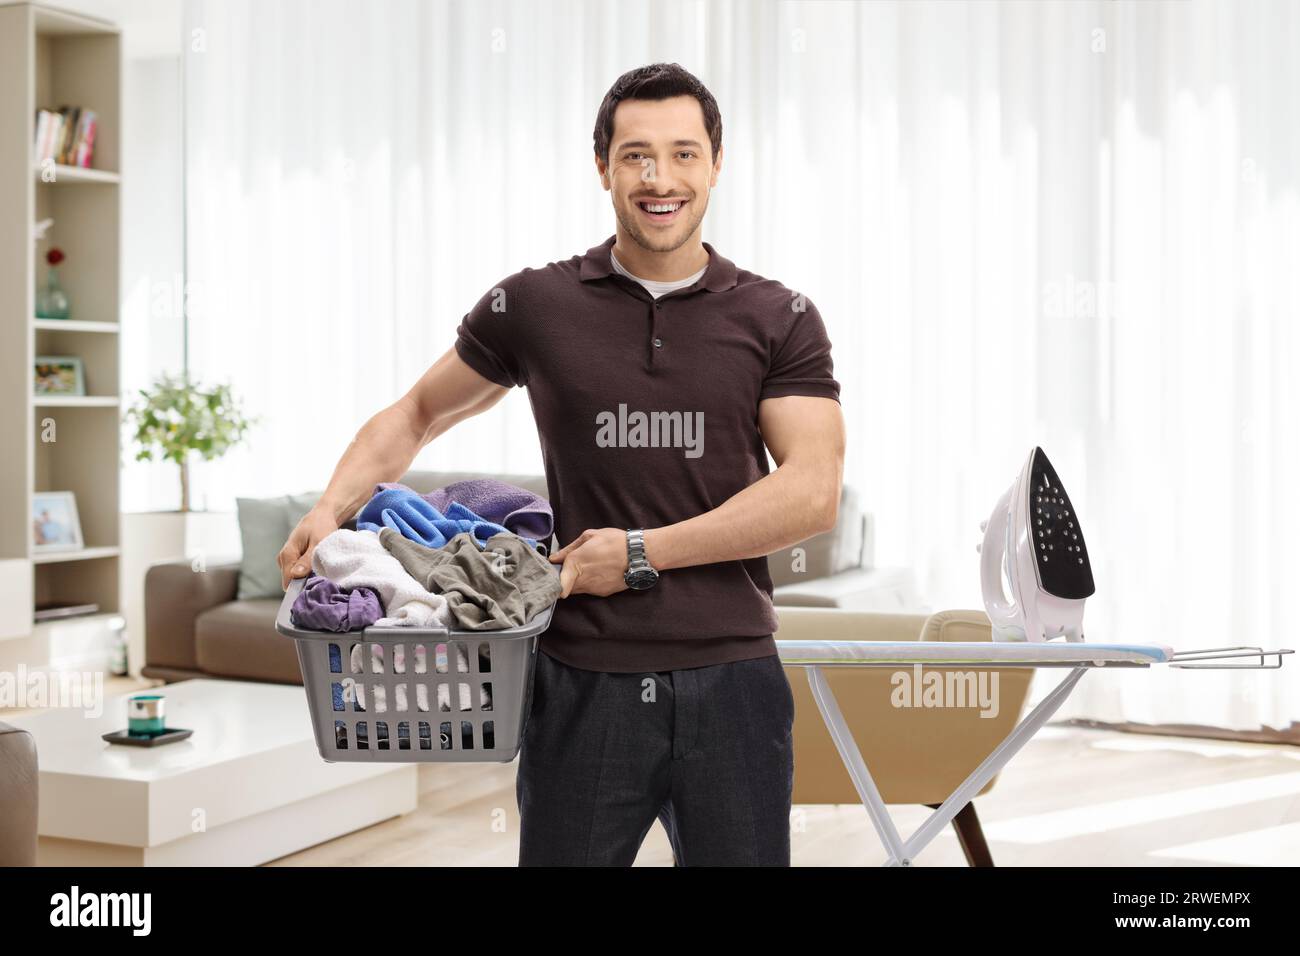 Guy holding a laundry basket full of clothes in front of an ironing board in a living room Stock Photo